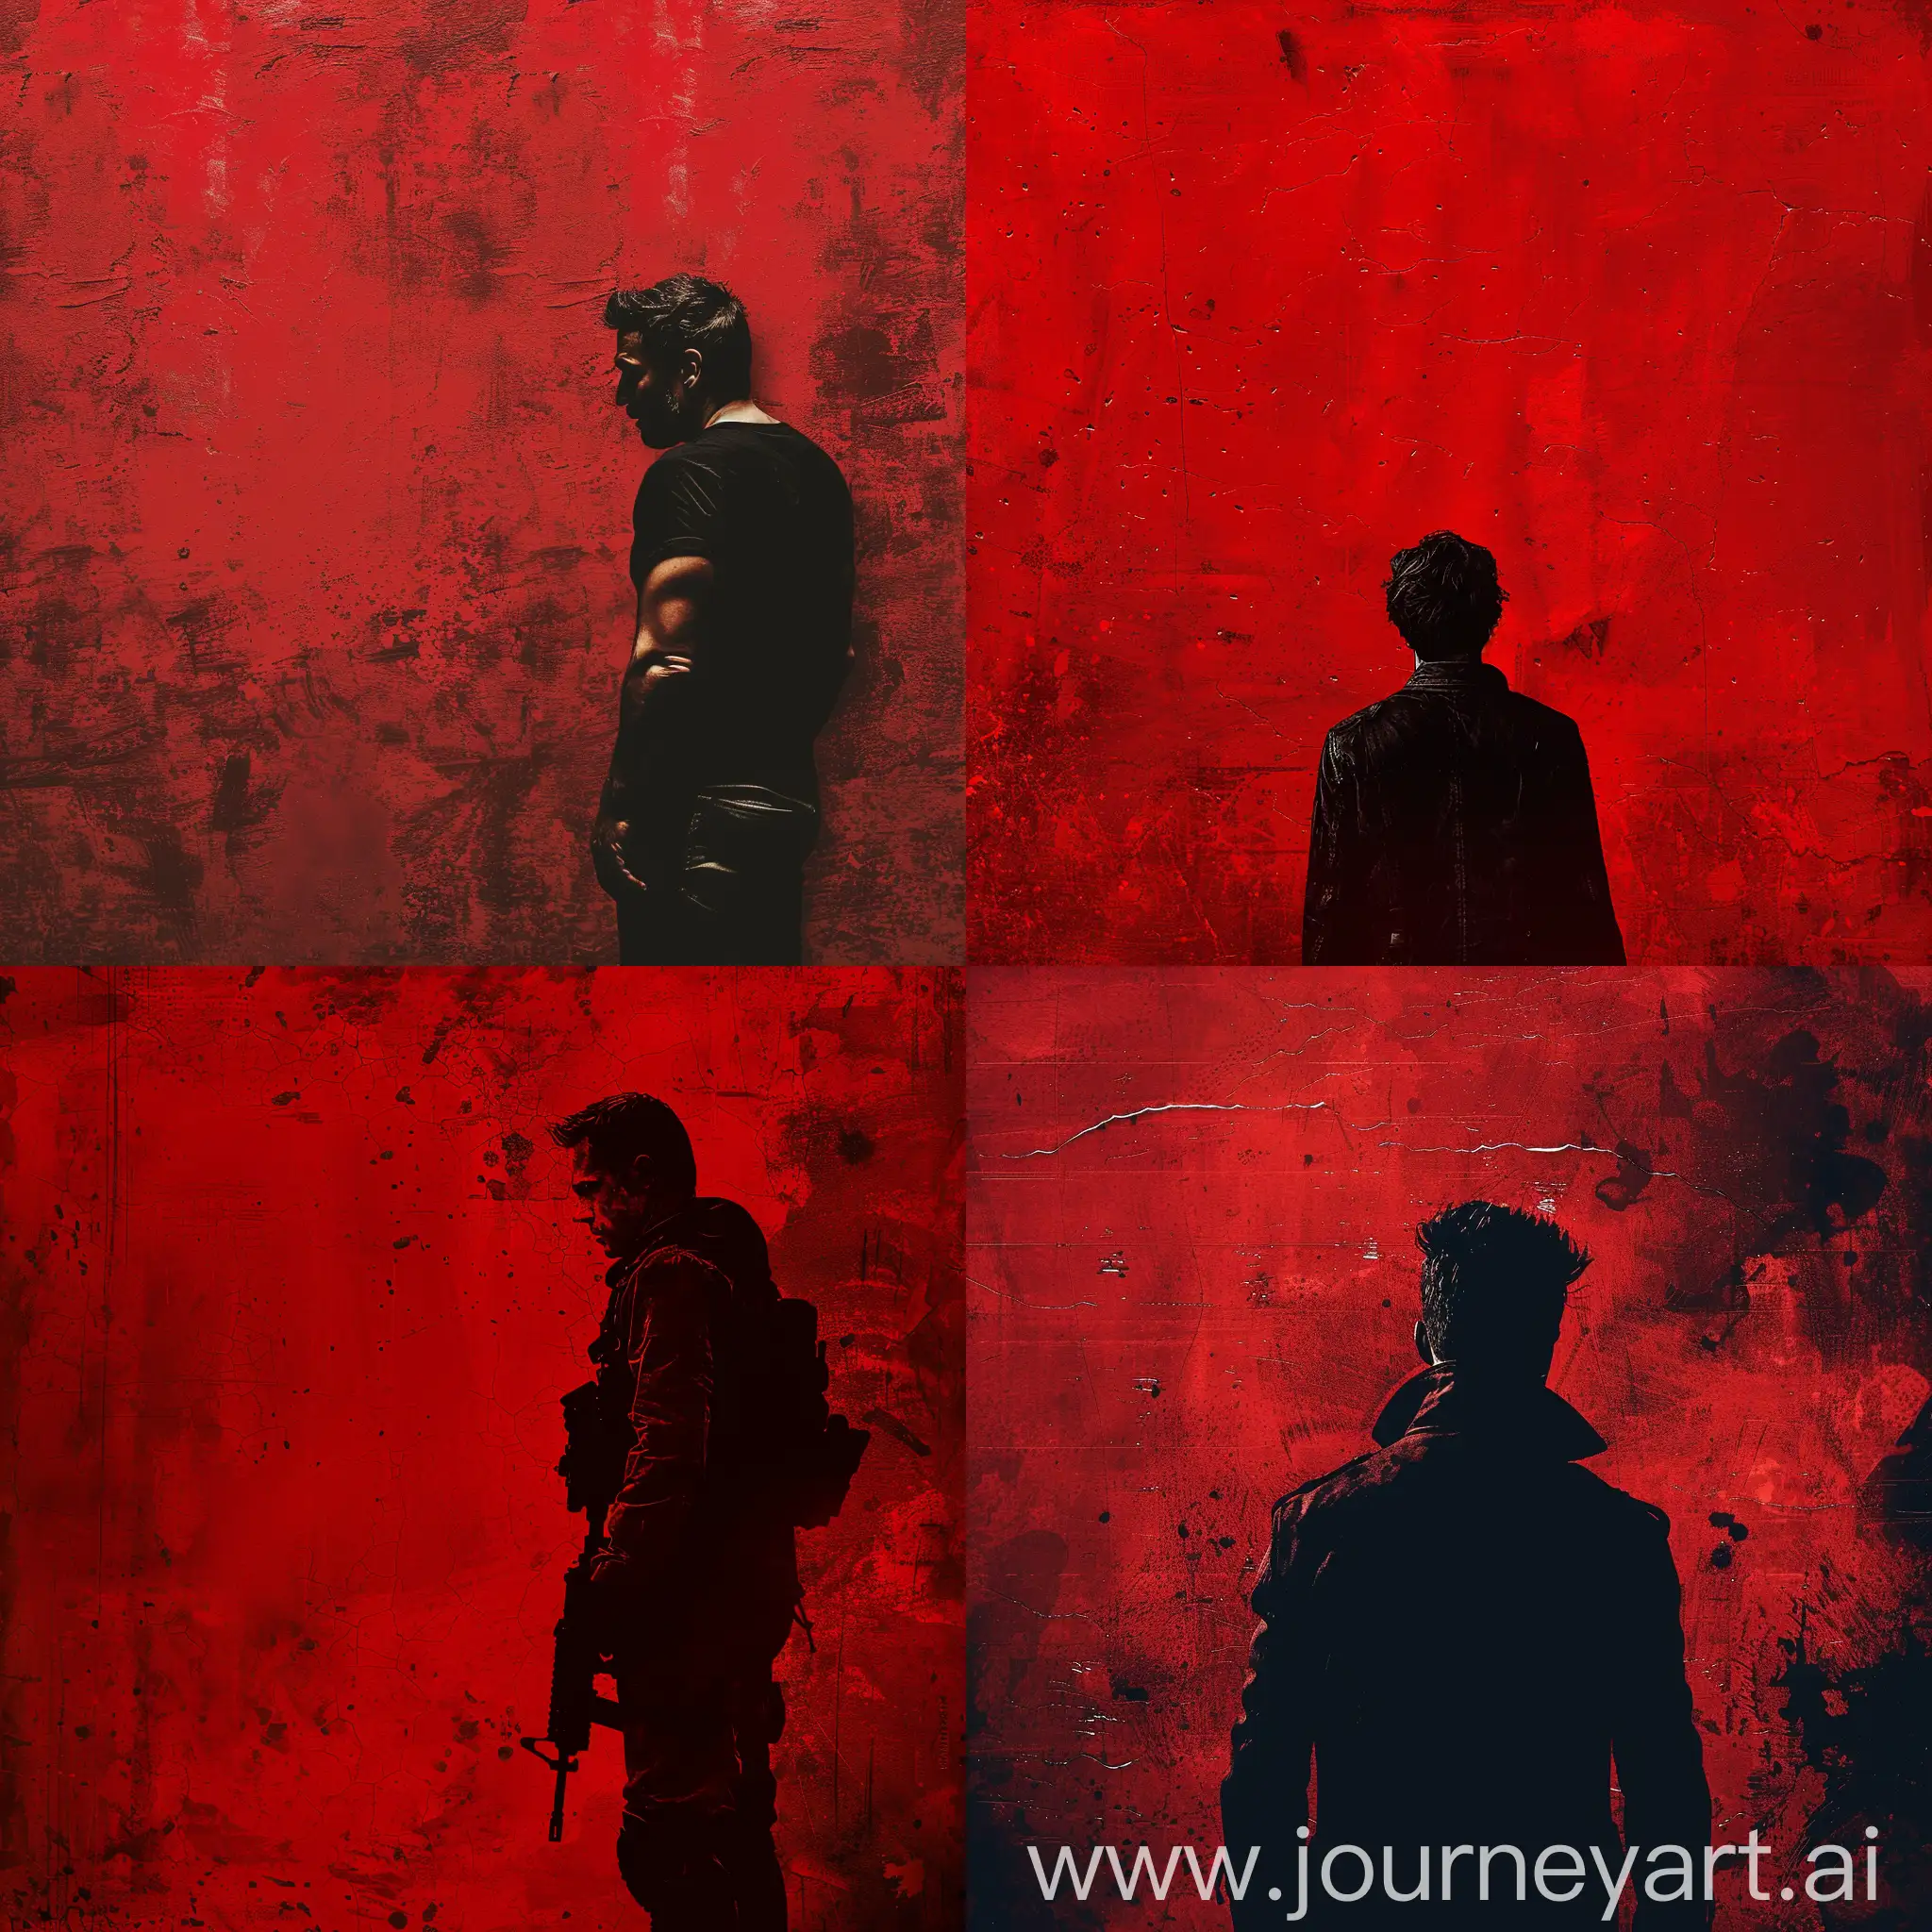 Intense-Drama-Movie-Poster-on-Red-Textured-Background